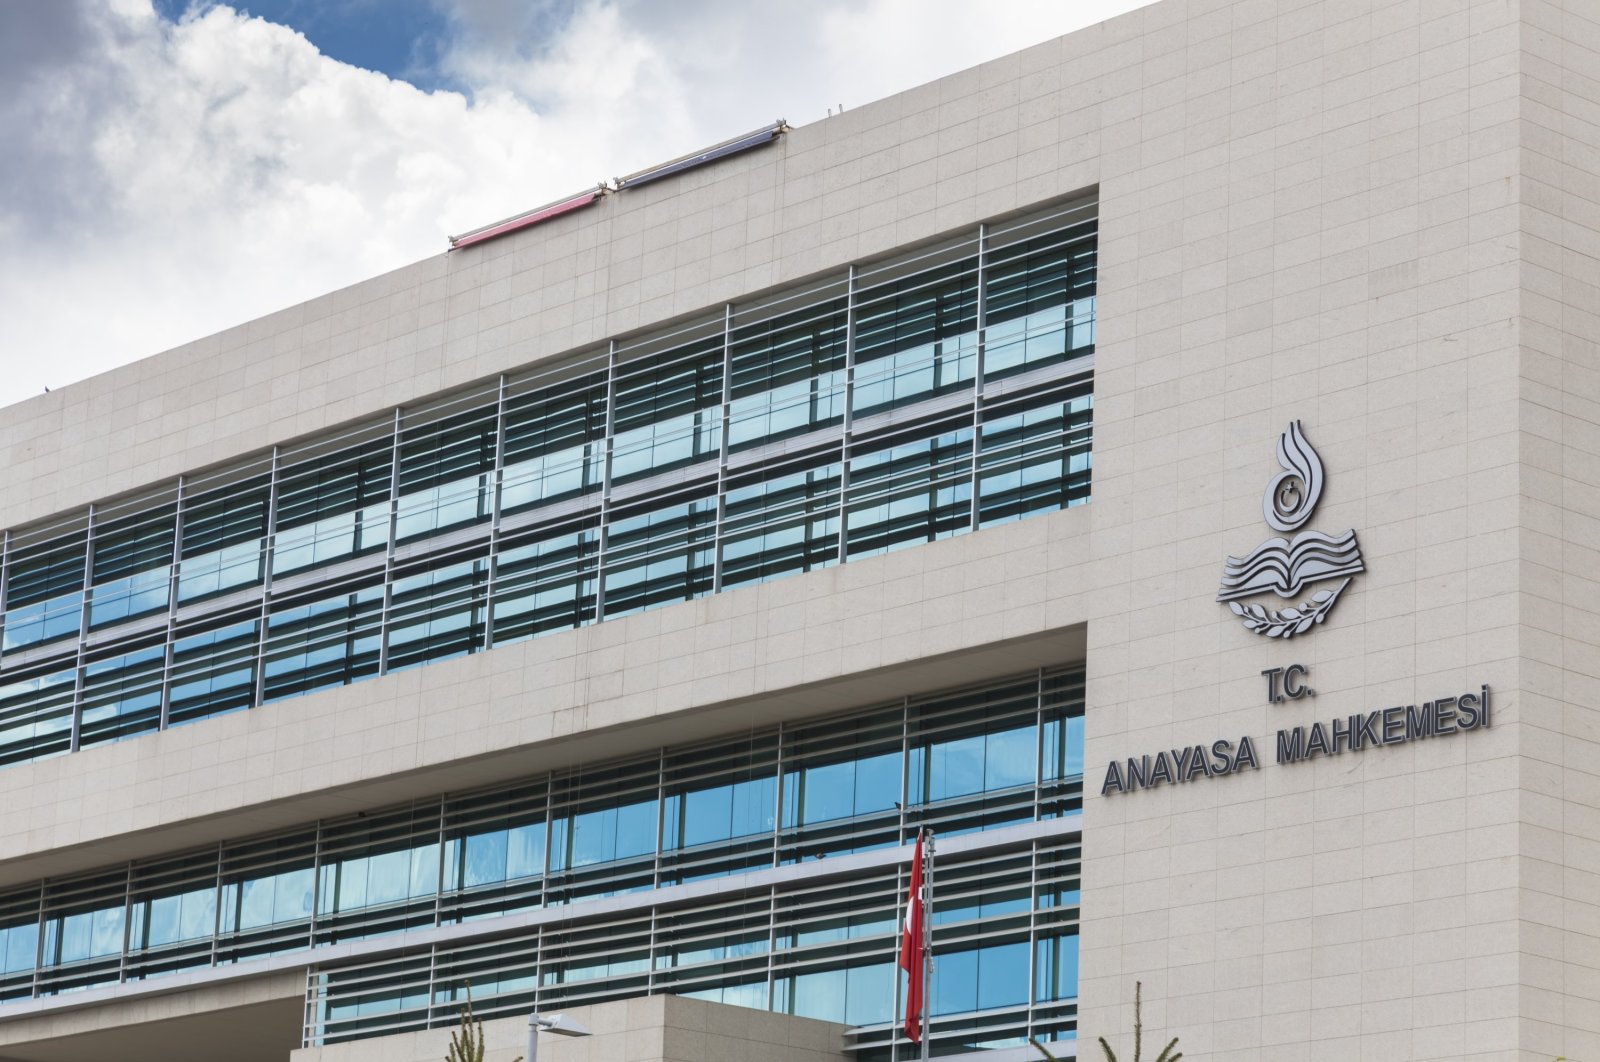 The Constitutional Court of Turkey, the highest legal body for constitutional review in Turkey, in Ankara. (Shutterstock File Photo)